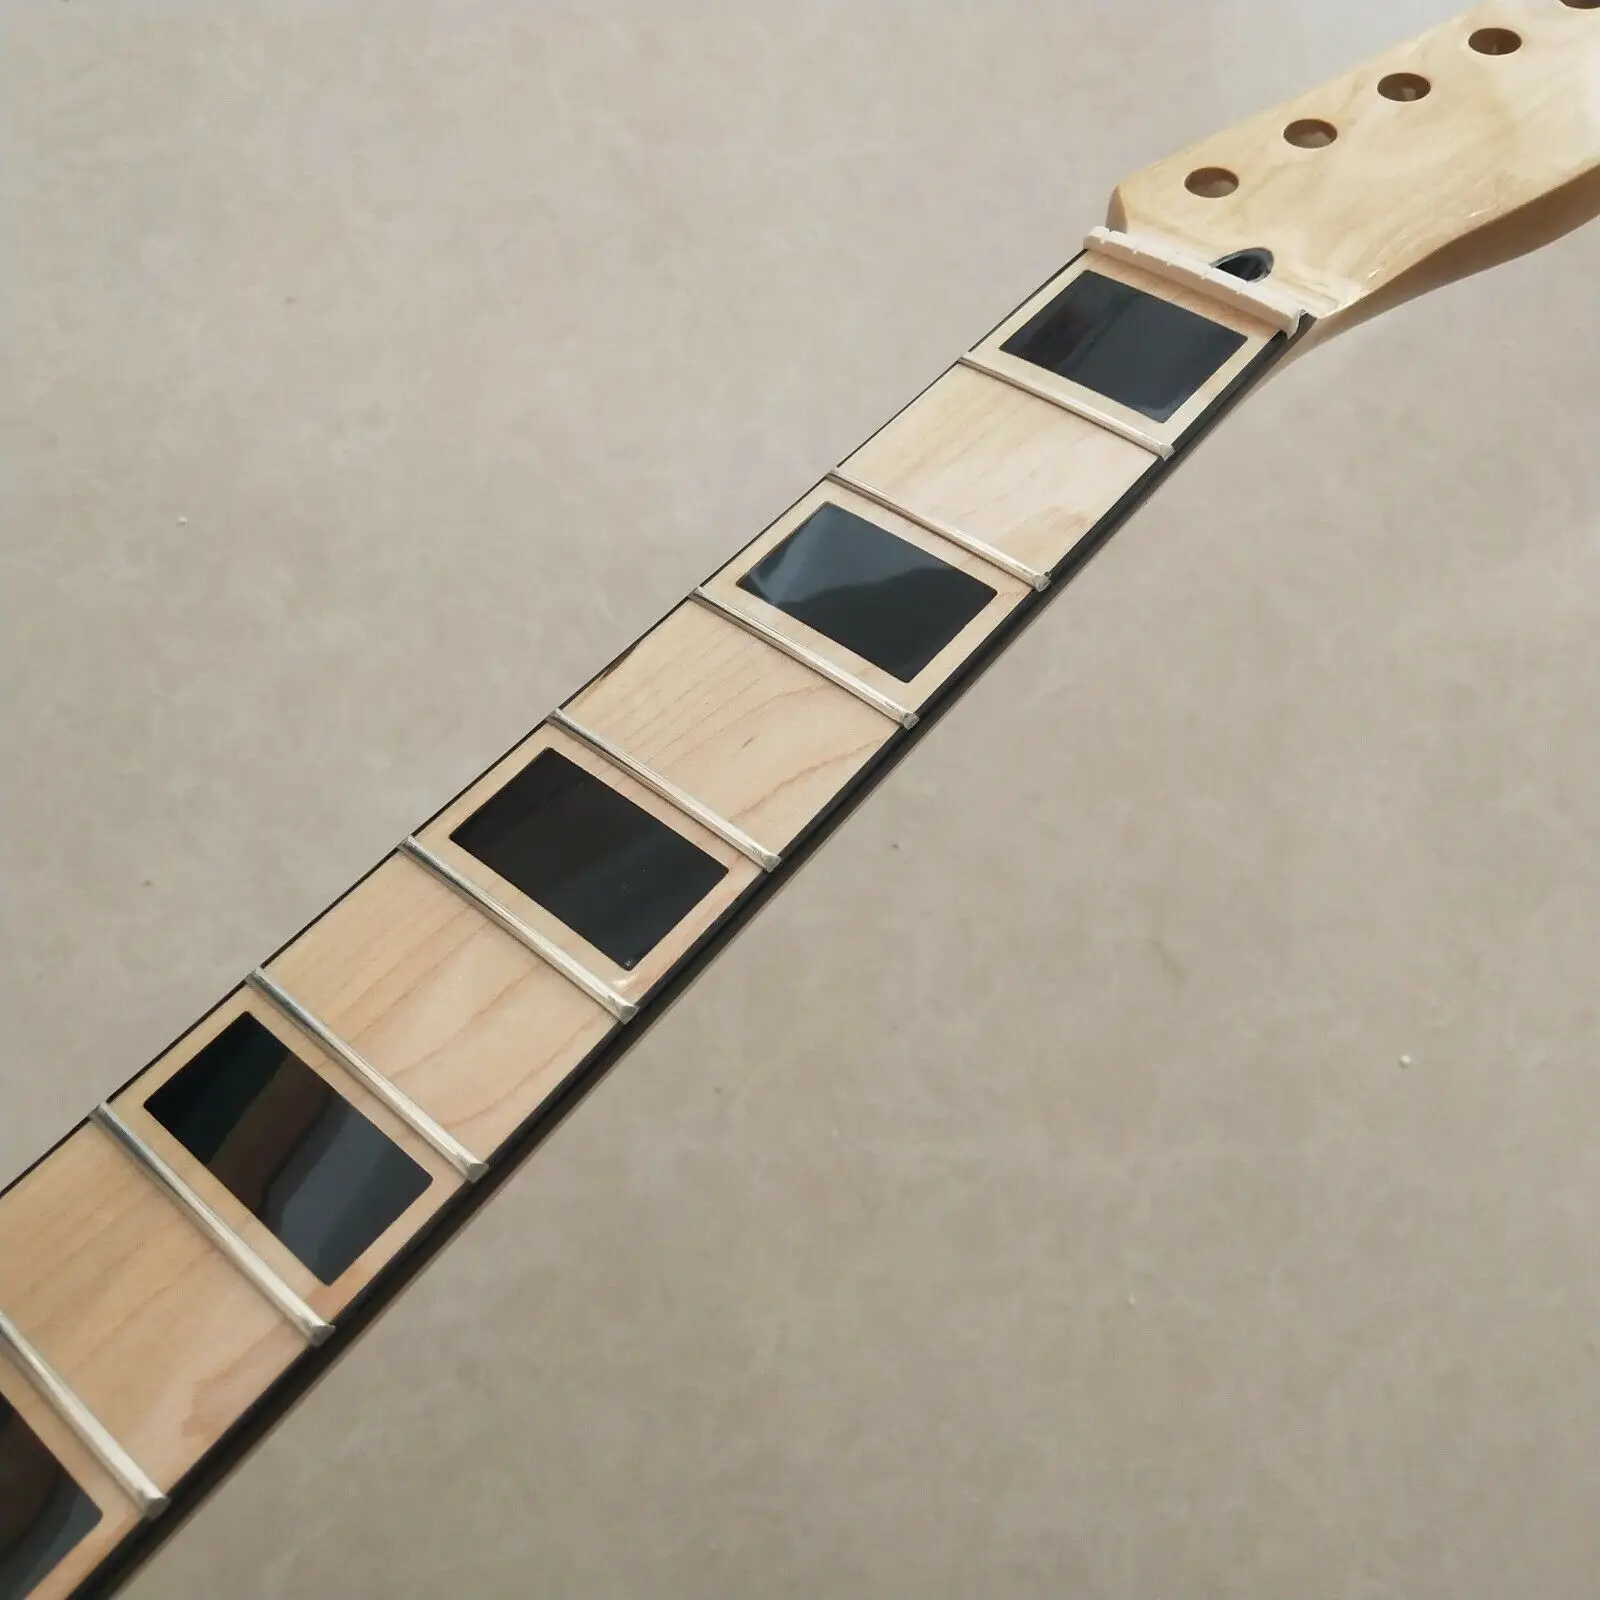 High quality Maple Guitar neck 22 fret 25.5in Maple Fretboard Black Block Inlay enlarge